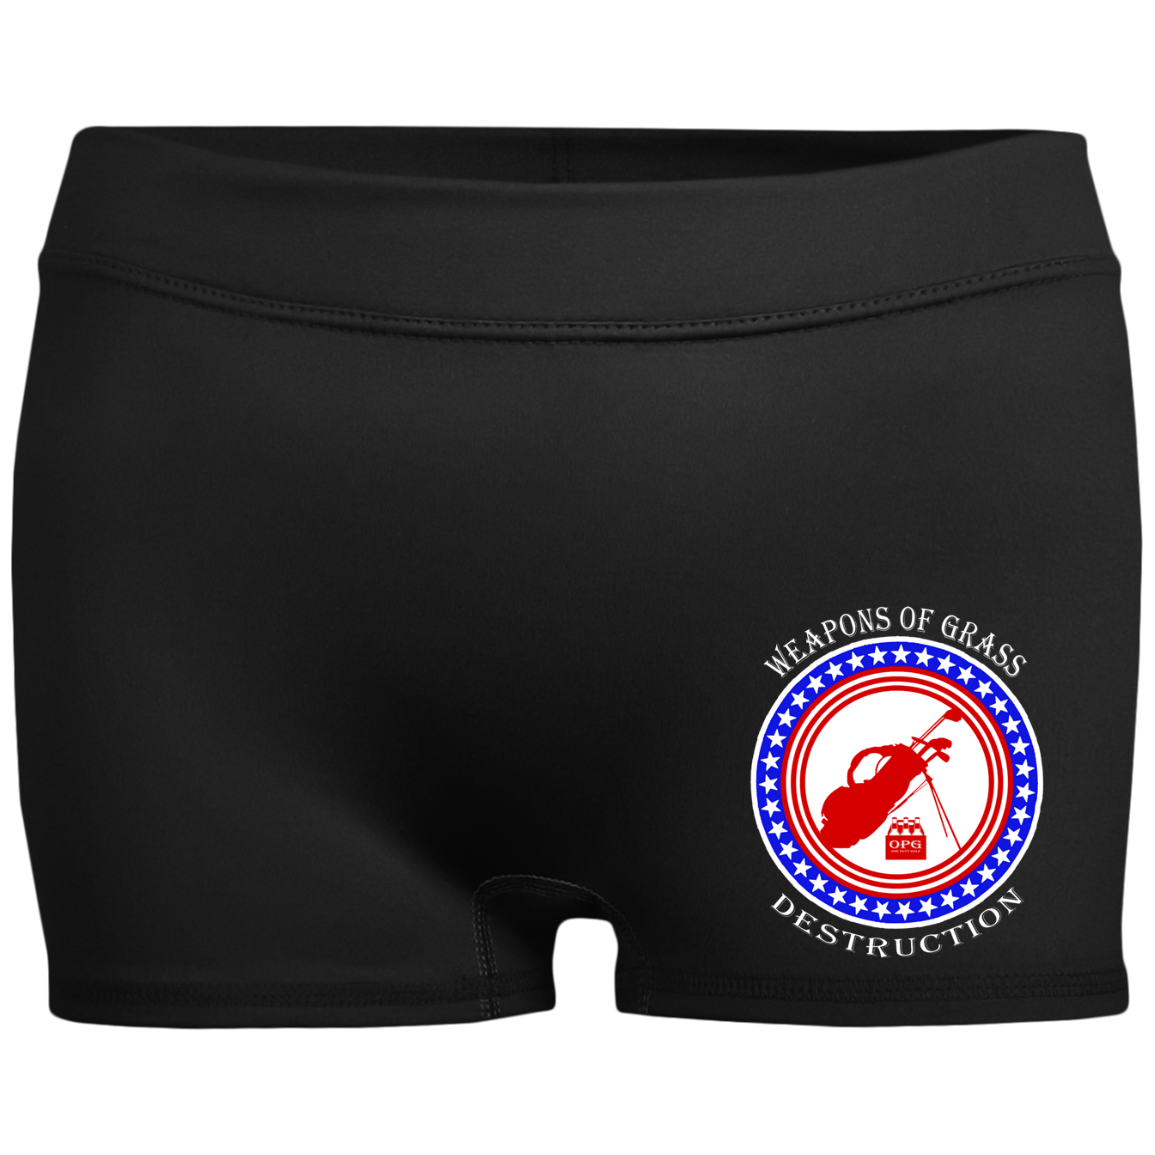 OPG Custom Design #18. Weapons of Grass Destruction. Ladies' Fitted Moisture-Wicking 2.5 inch Inseam Shorts